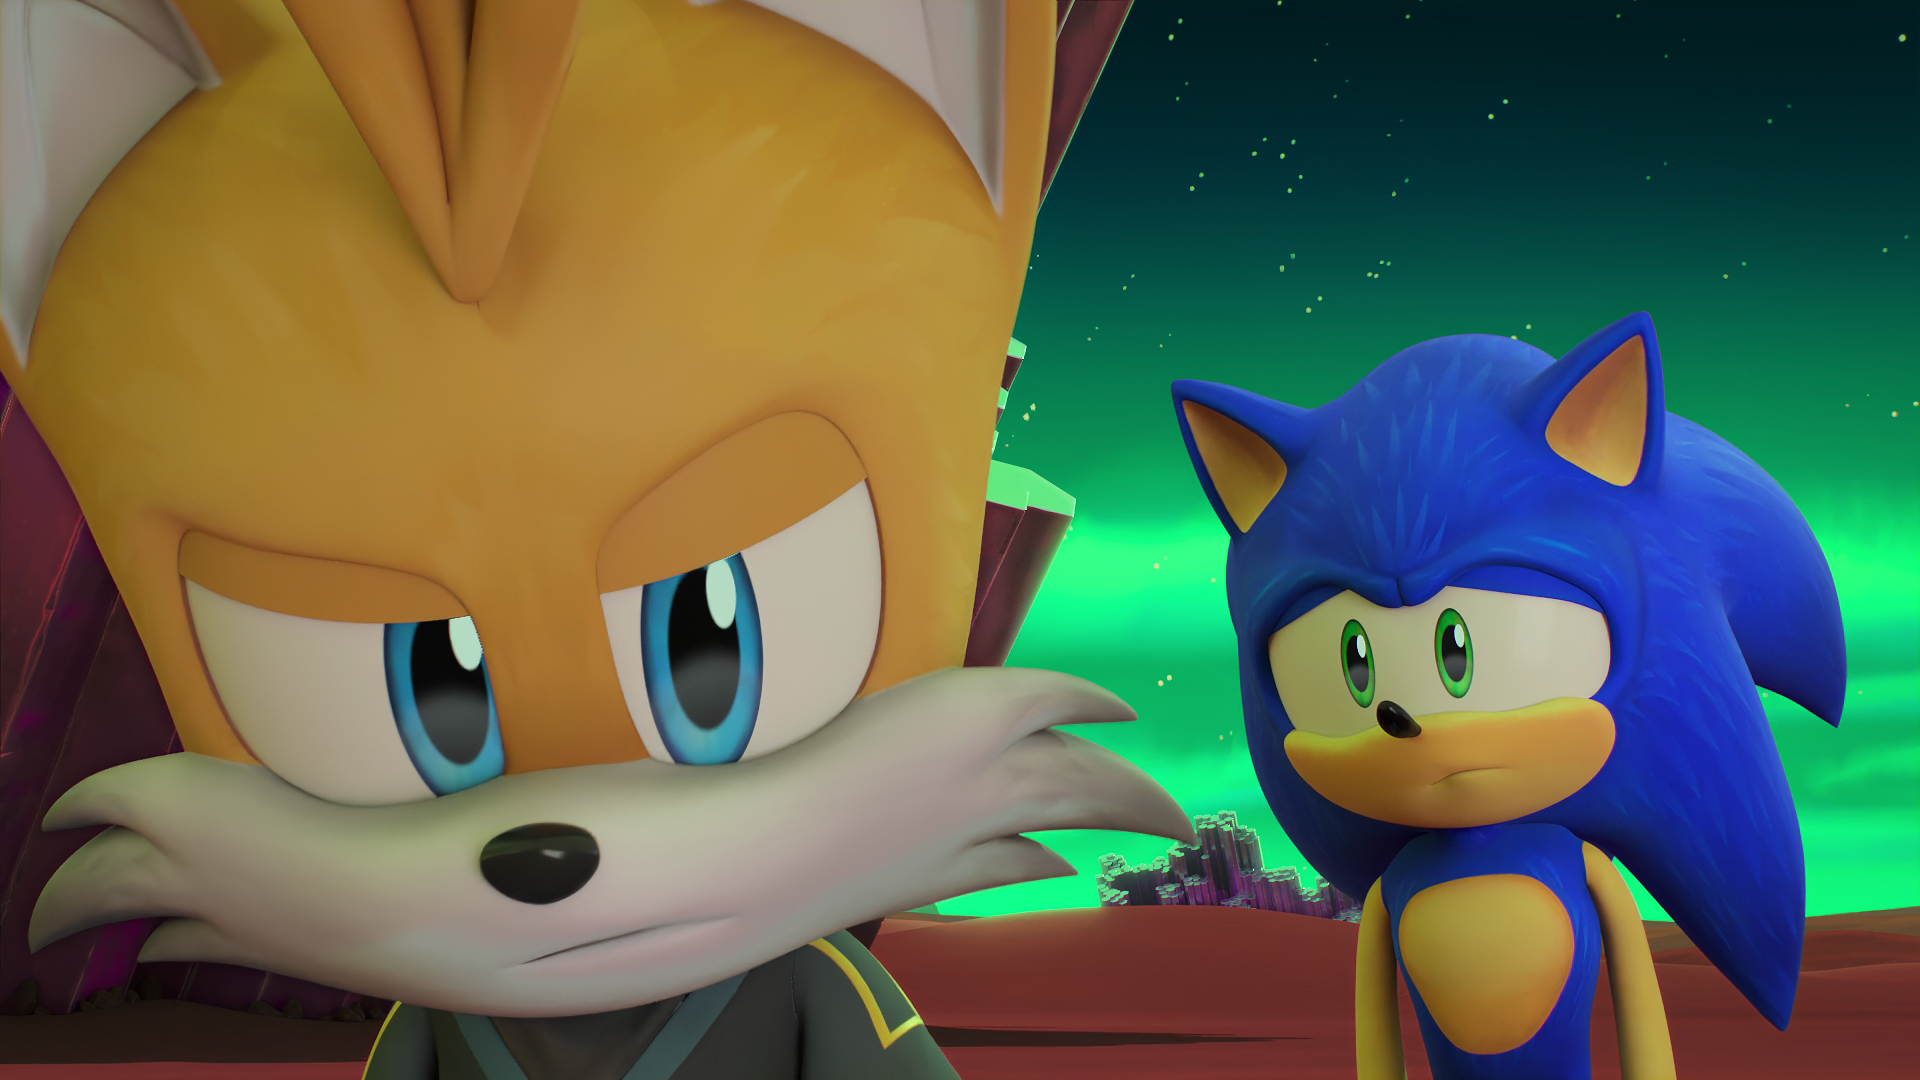 Sonic Prime - Tails Nine #09 by SonicBoomGirl23 on DeviantArt